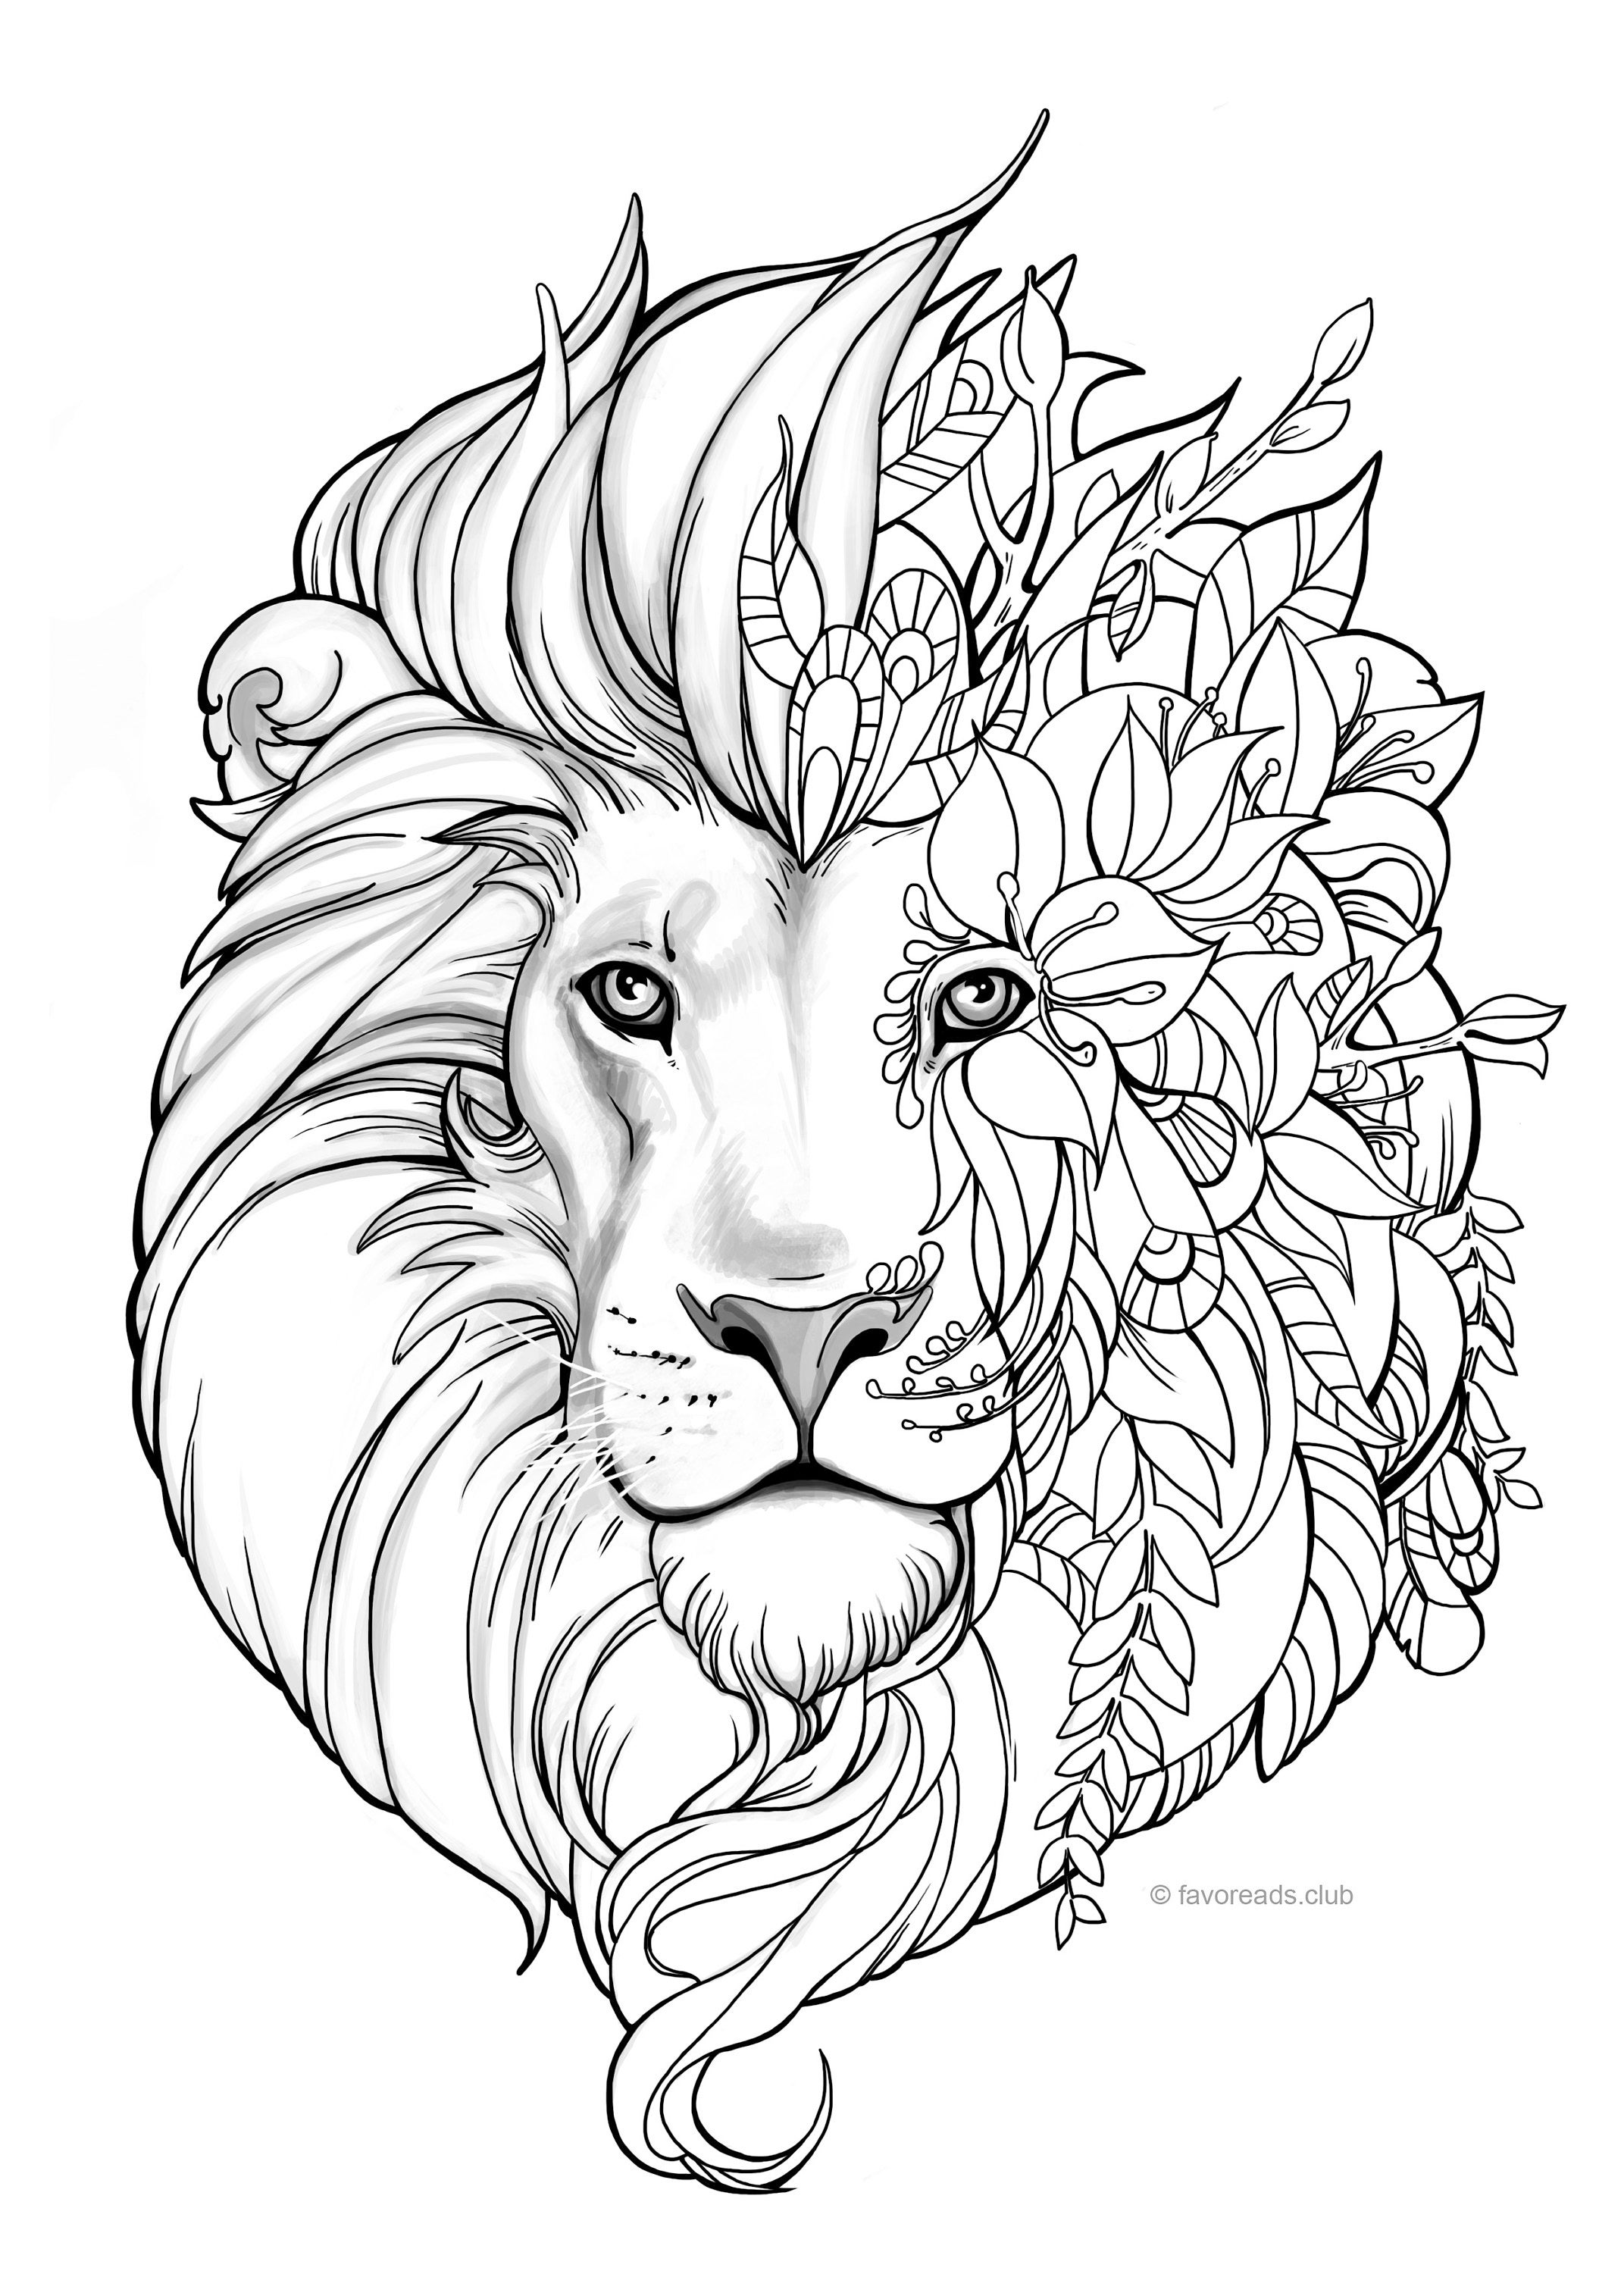 Lion Coloring Page Pdf : The Lion King Simba Coloring Page 01 | Free The Lion King ... : This coloring book with lions is free and available for download and coloring.